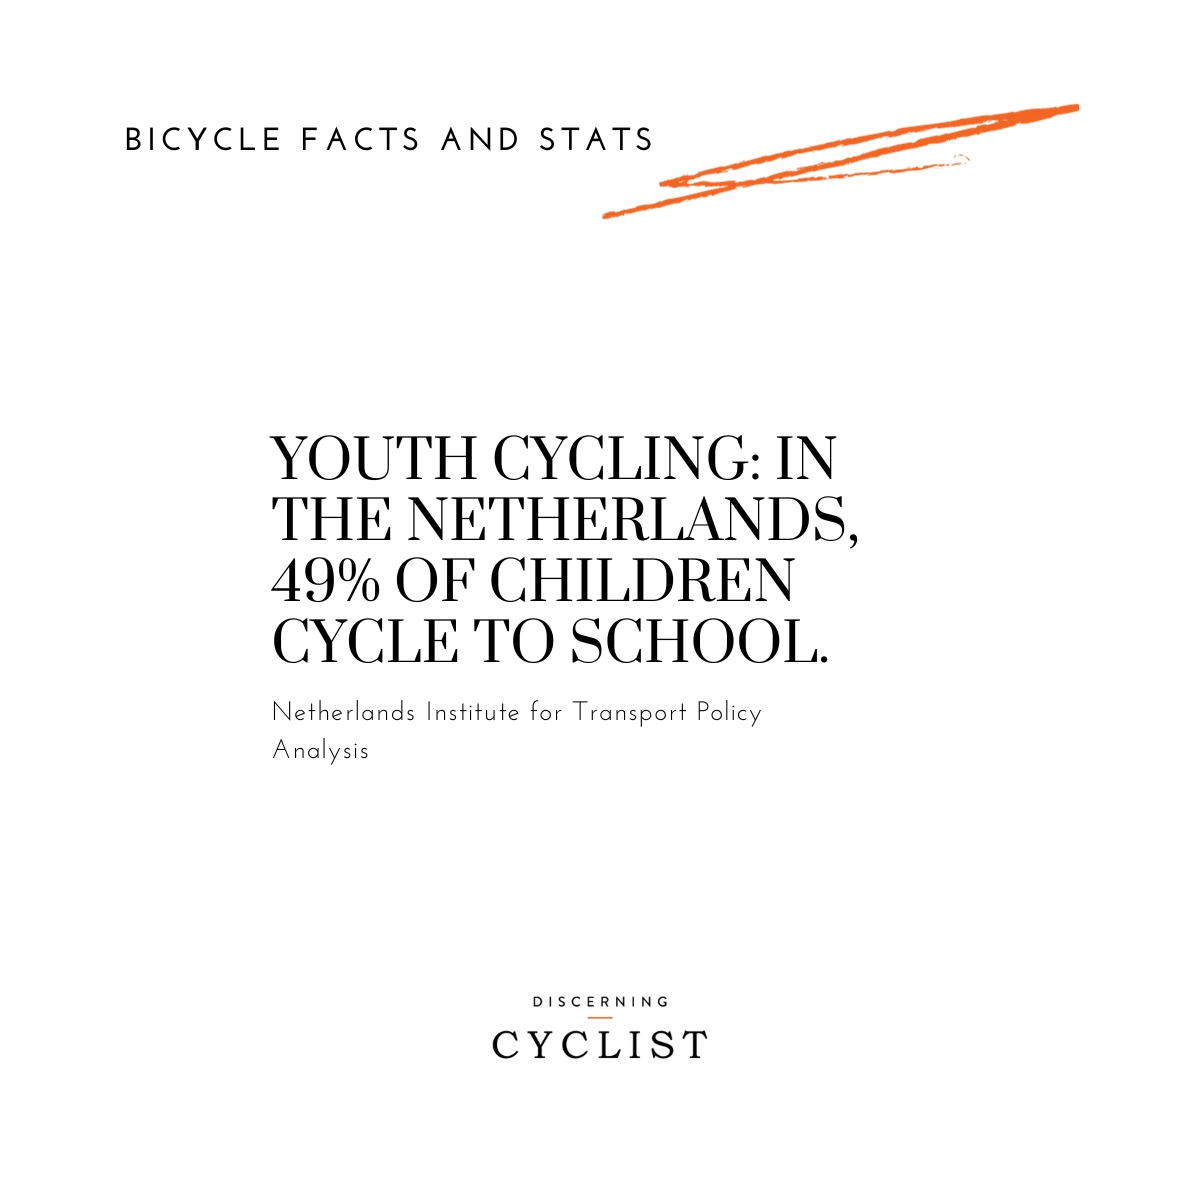 Youth Cycling: In the Netherlands, 49% of children cycle to school.